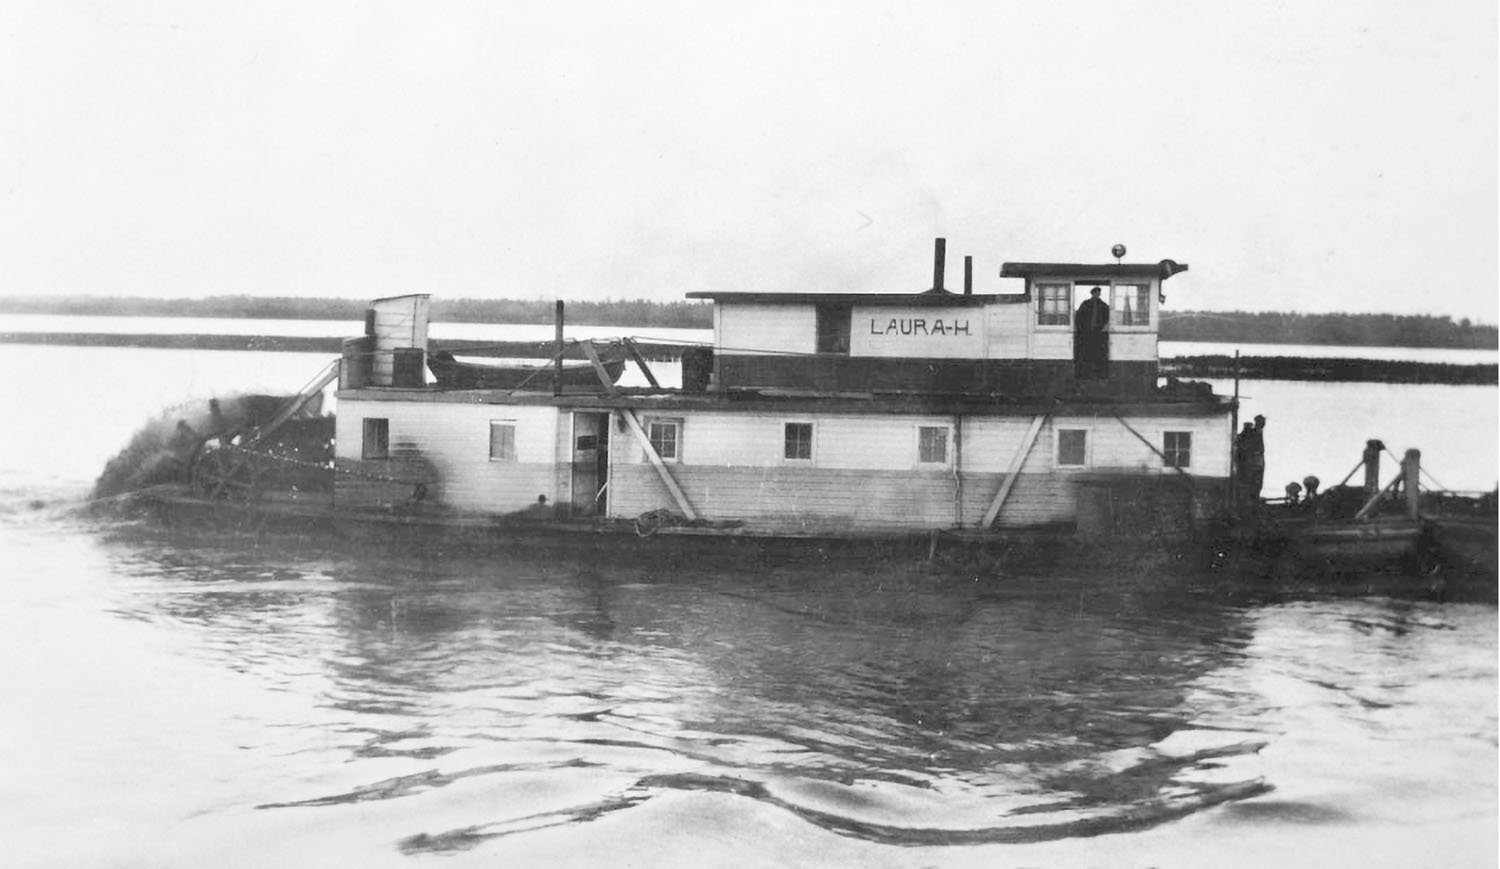 The Laura H as built in 1927.  (Photo courtesy Capt. Steve Huffman)